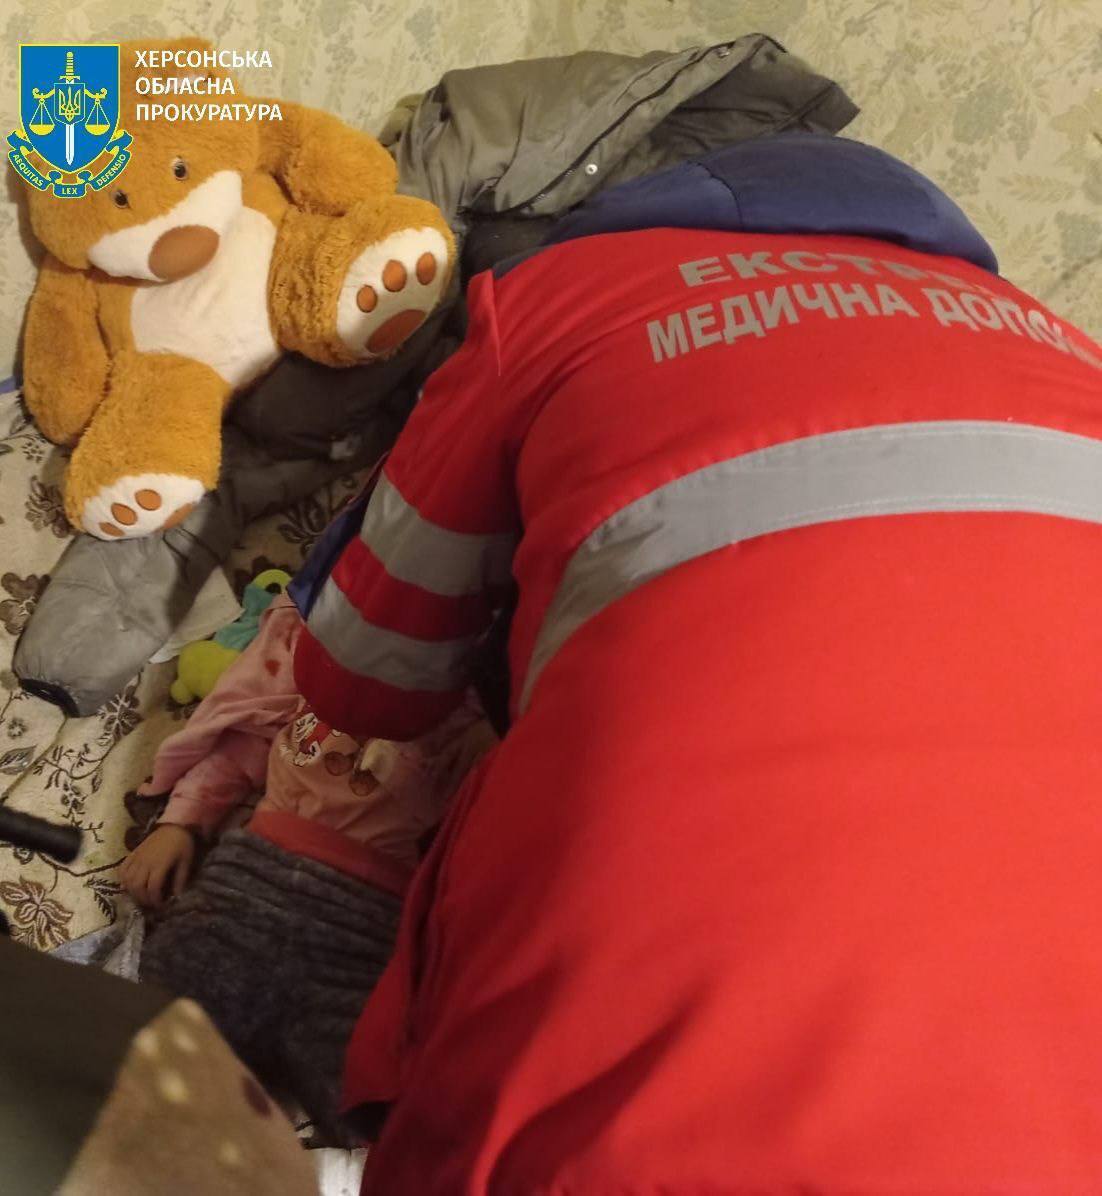 Russian army attacked Kherson in the morning, wounding 5 people: a child among them